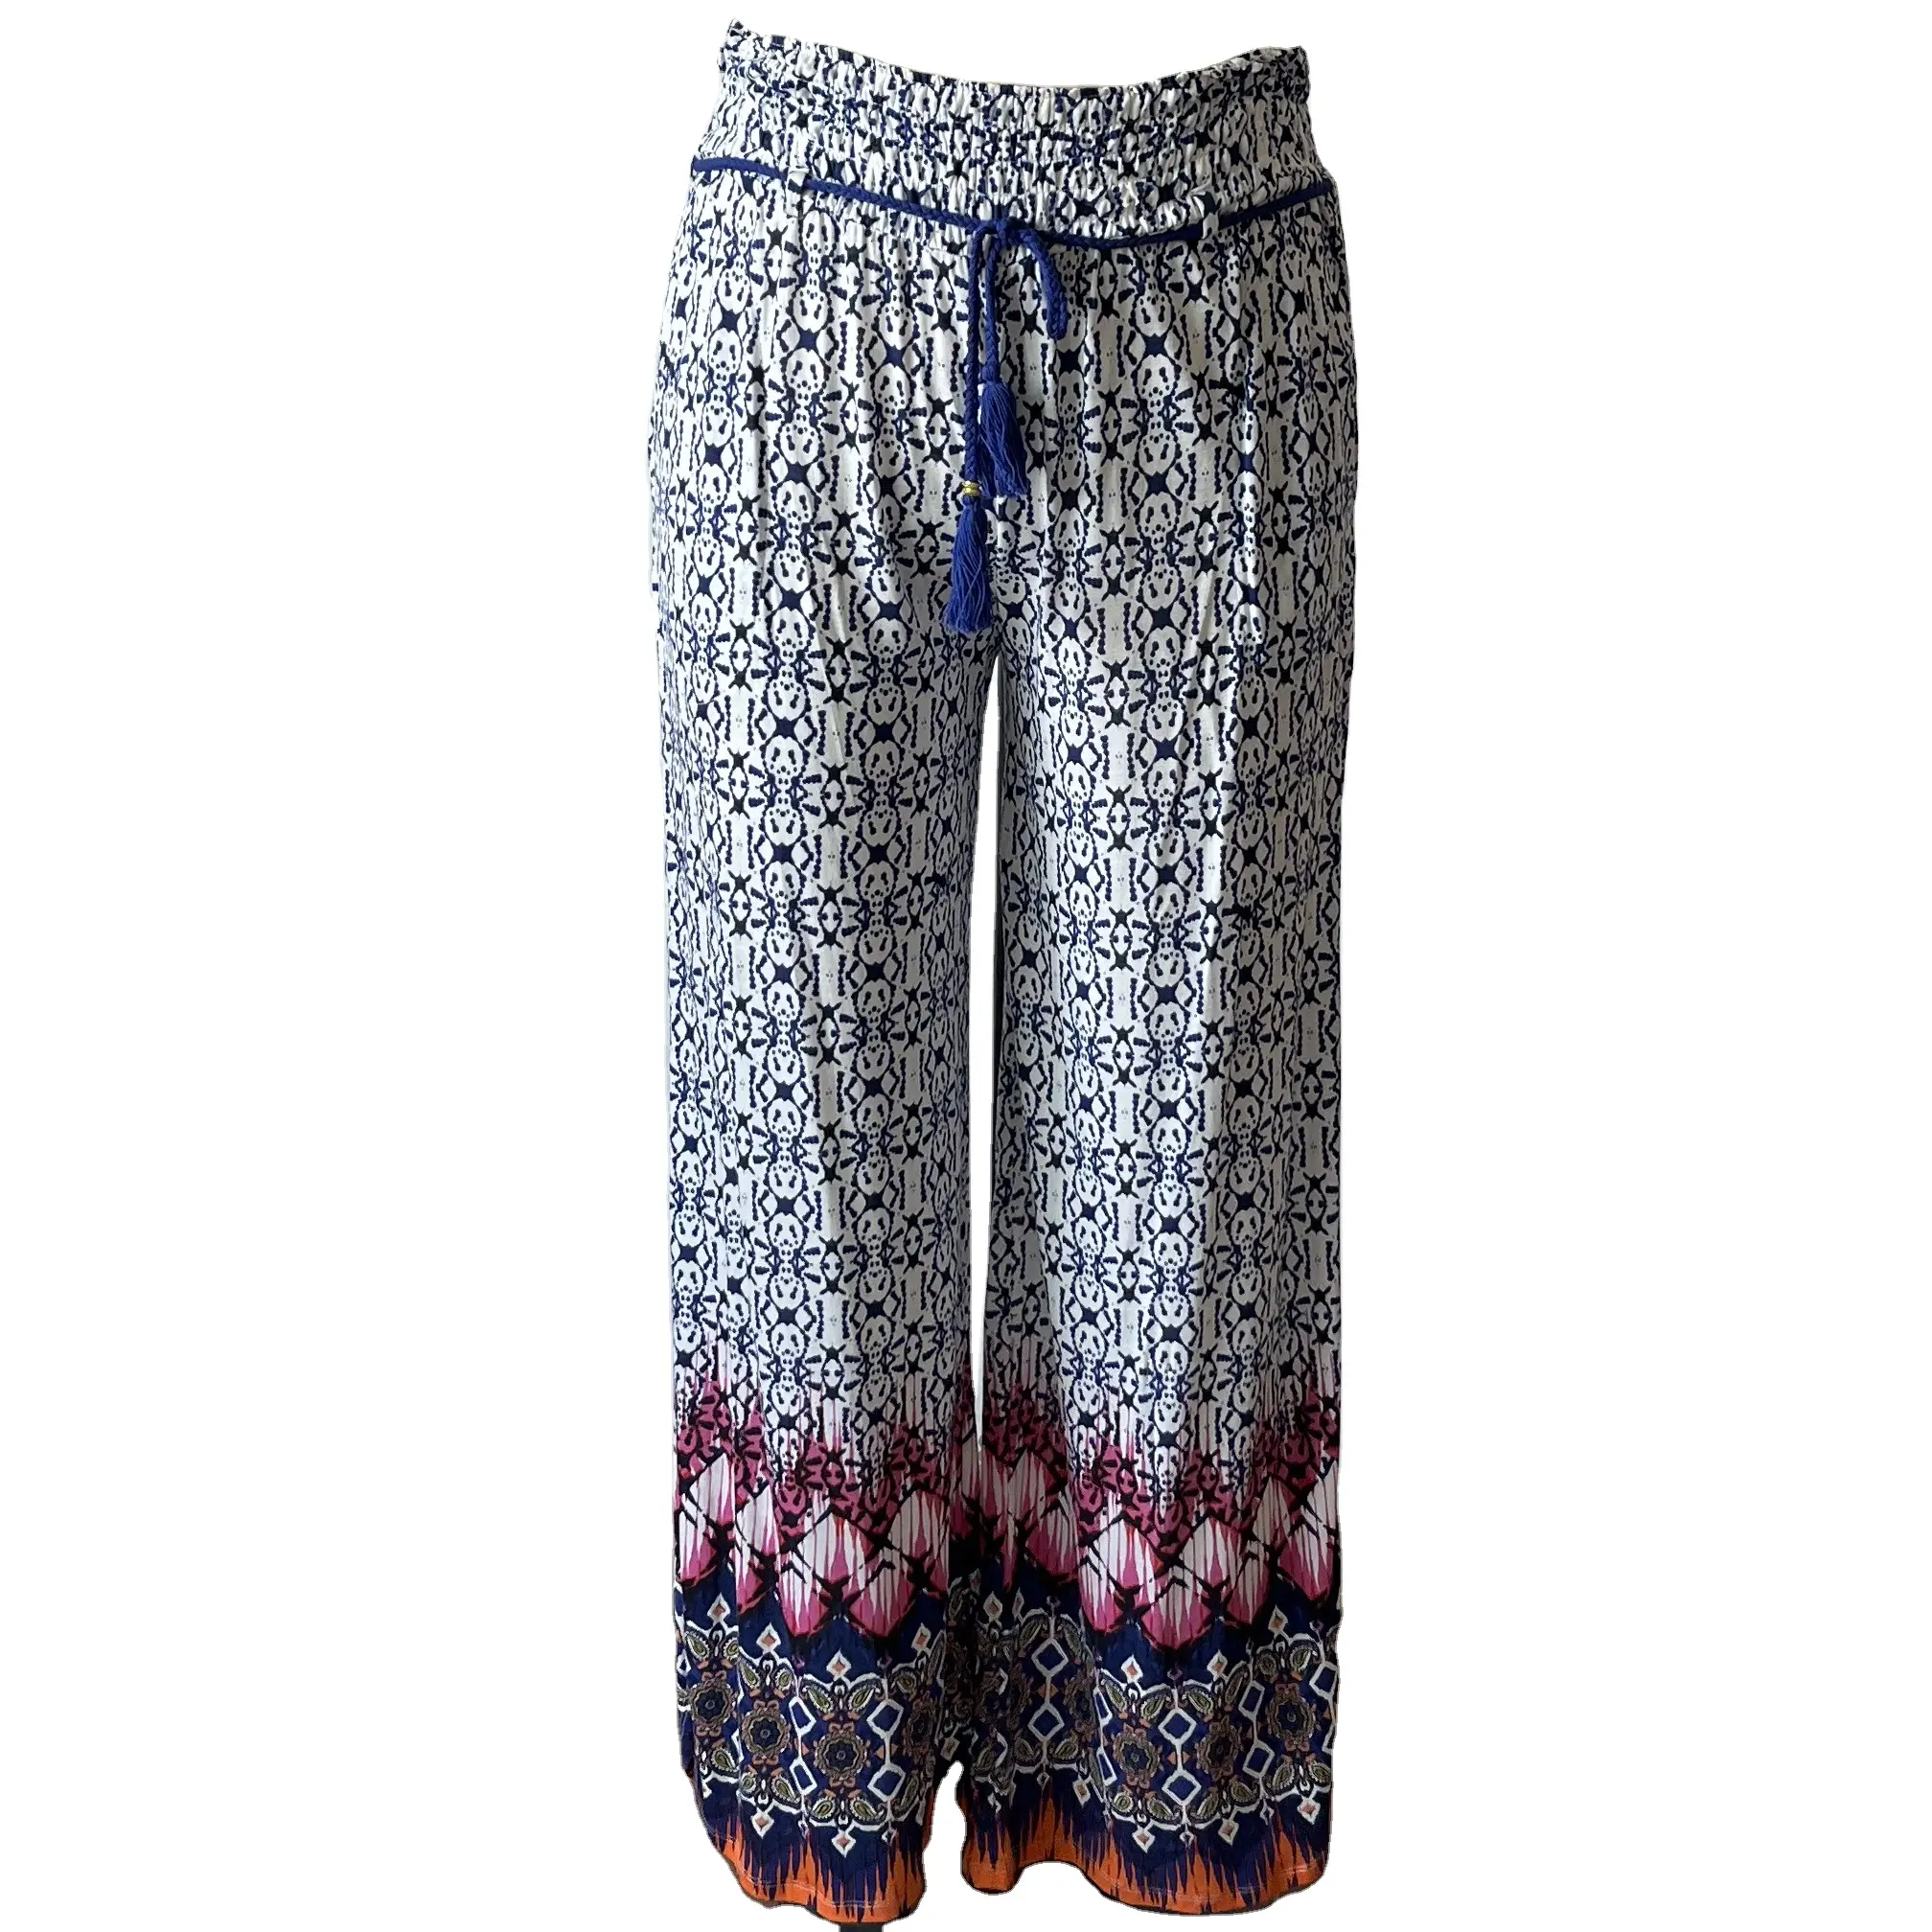 Casual Women's Trousers Floral Printed Pants With Tassel Rope Fashion Placement Print Trousers